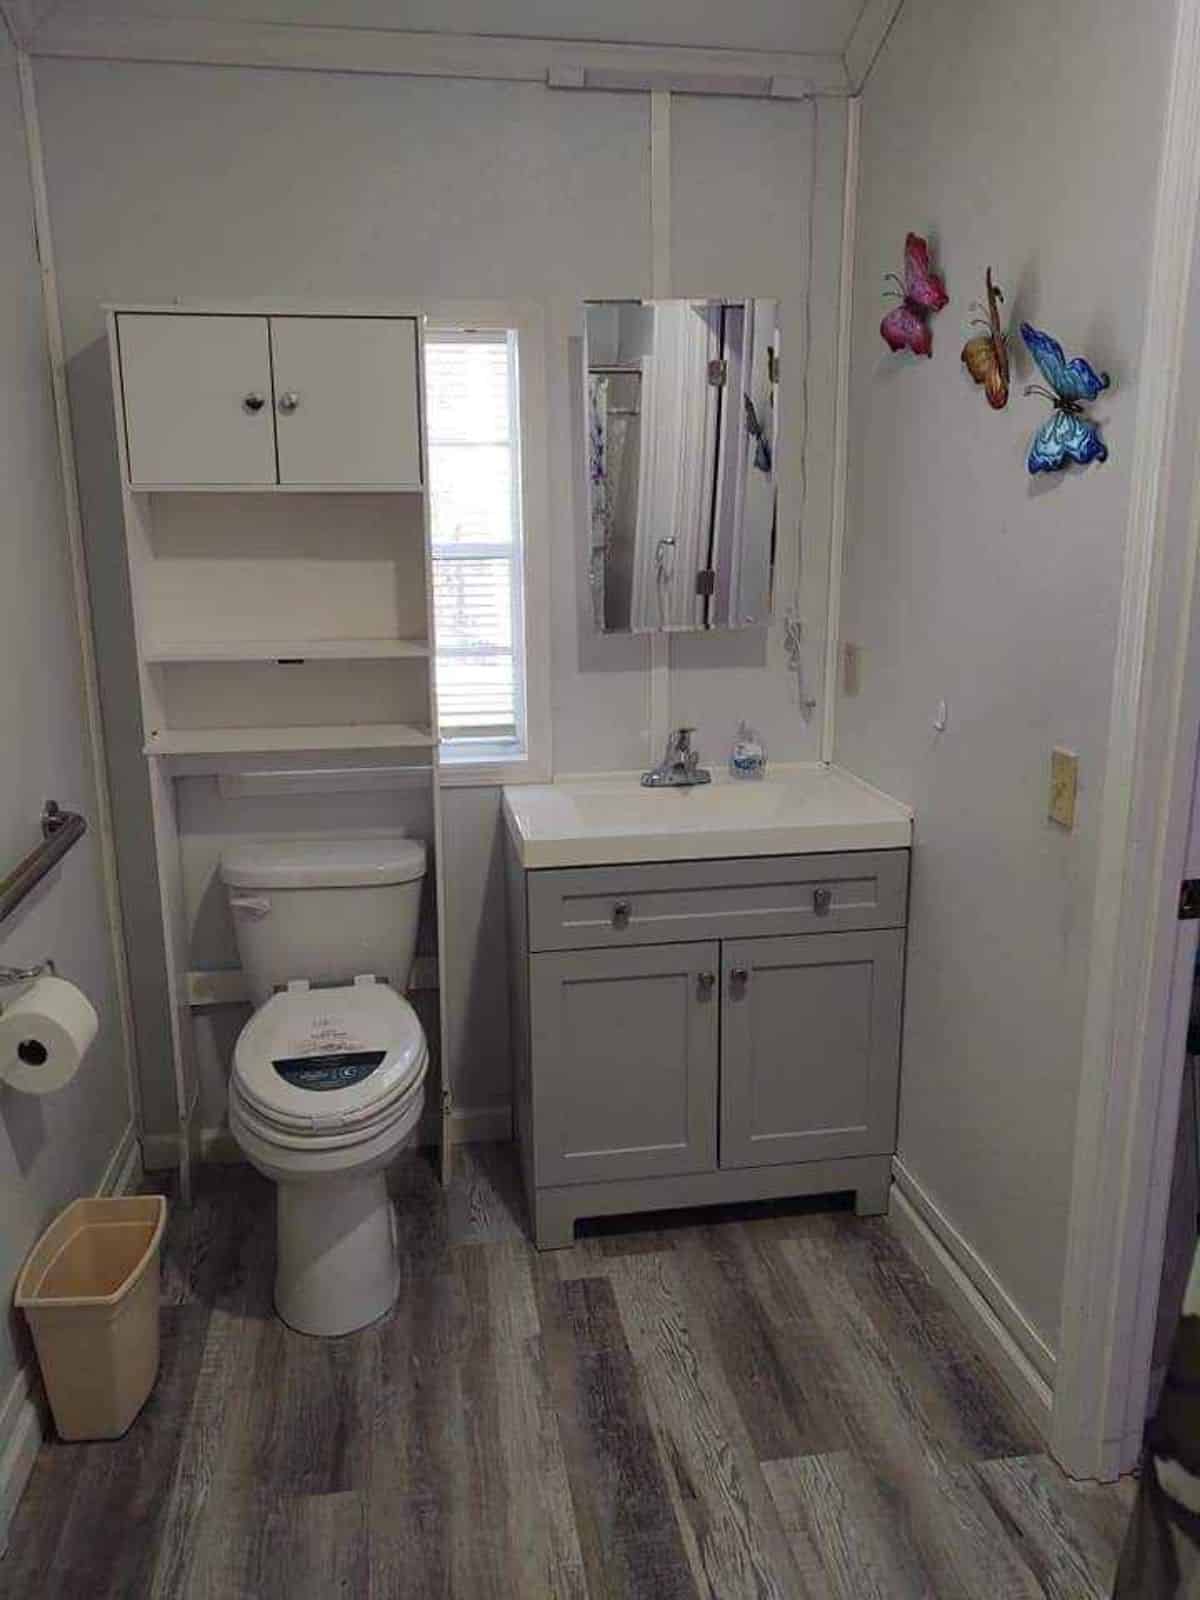 Bathroom of 40’ Tiny House has a standard toilet, sink with vanity & mirror and separate shower area